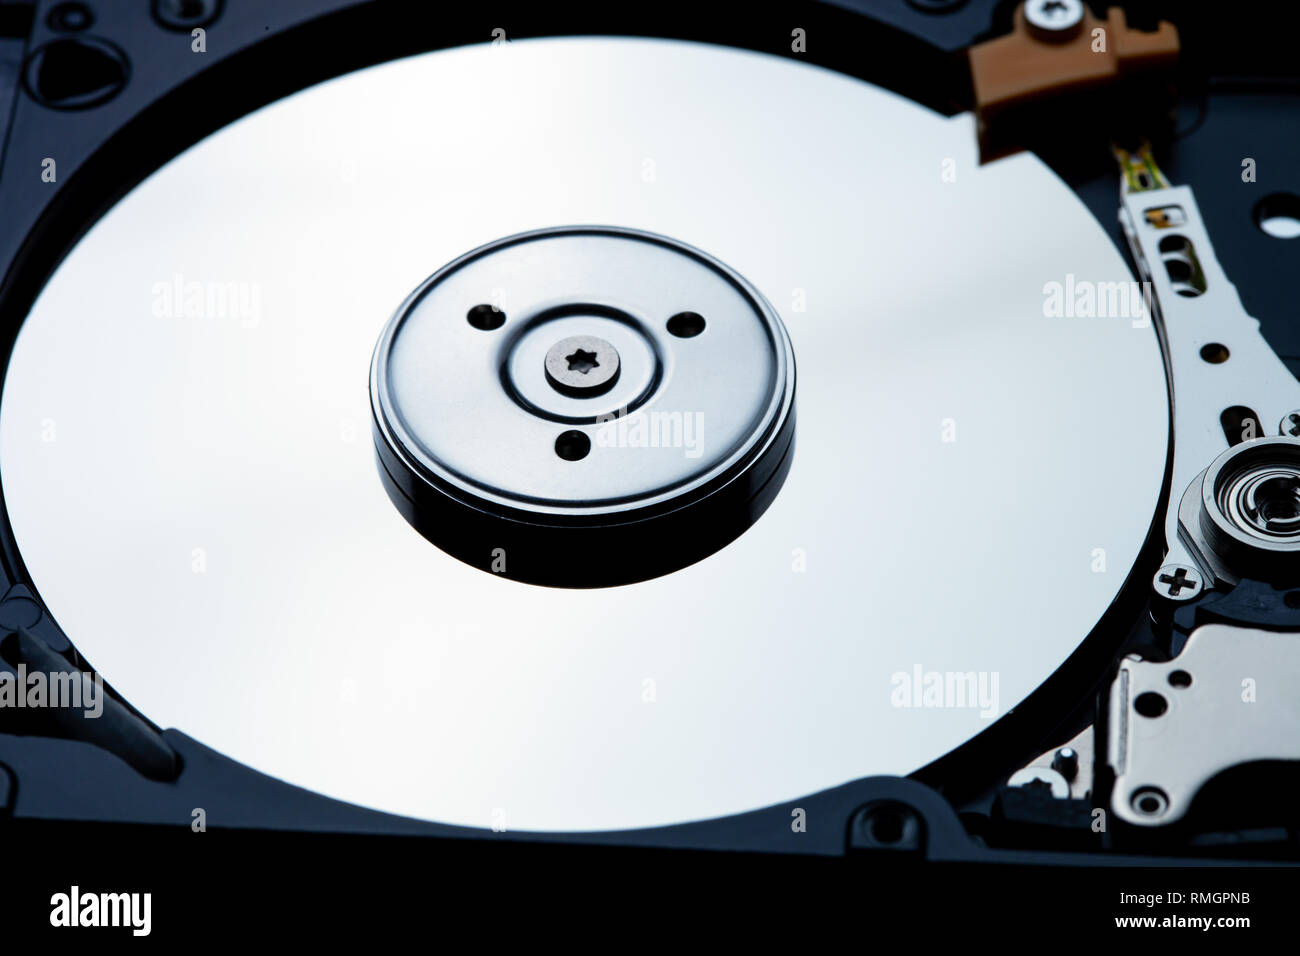 Close up shot of hard disk drive interior showing the metallic shine of the disk Stock Photo